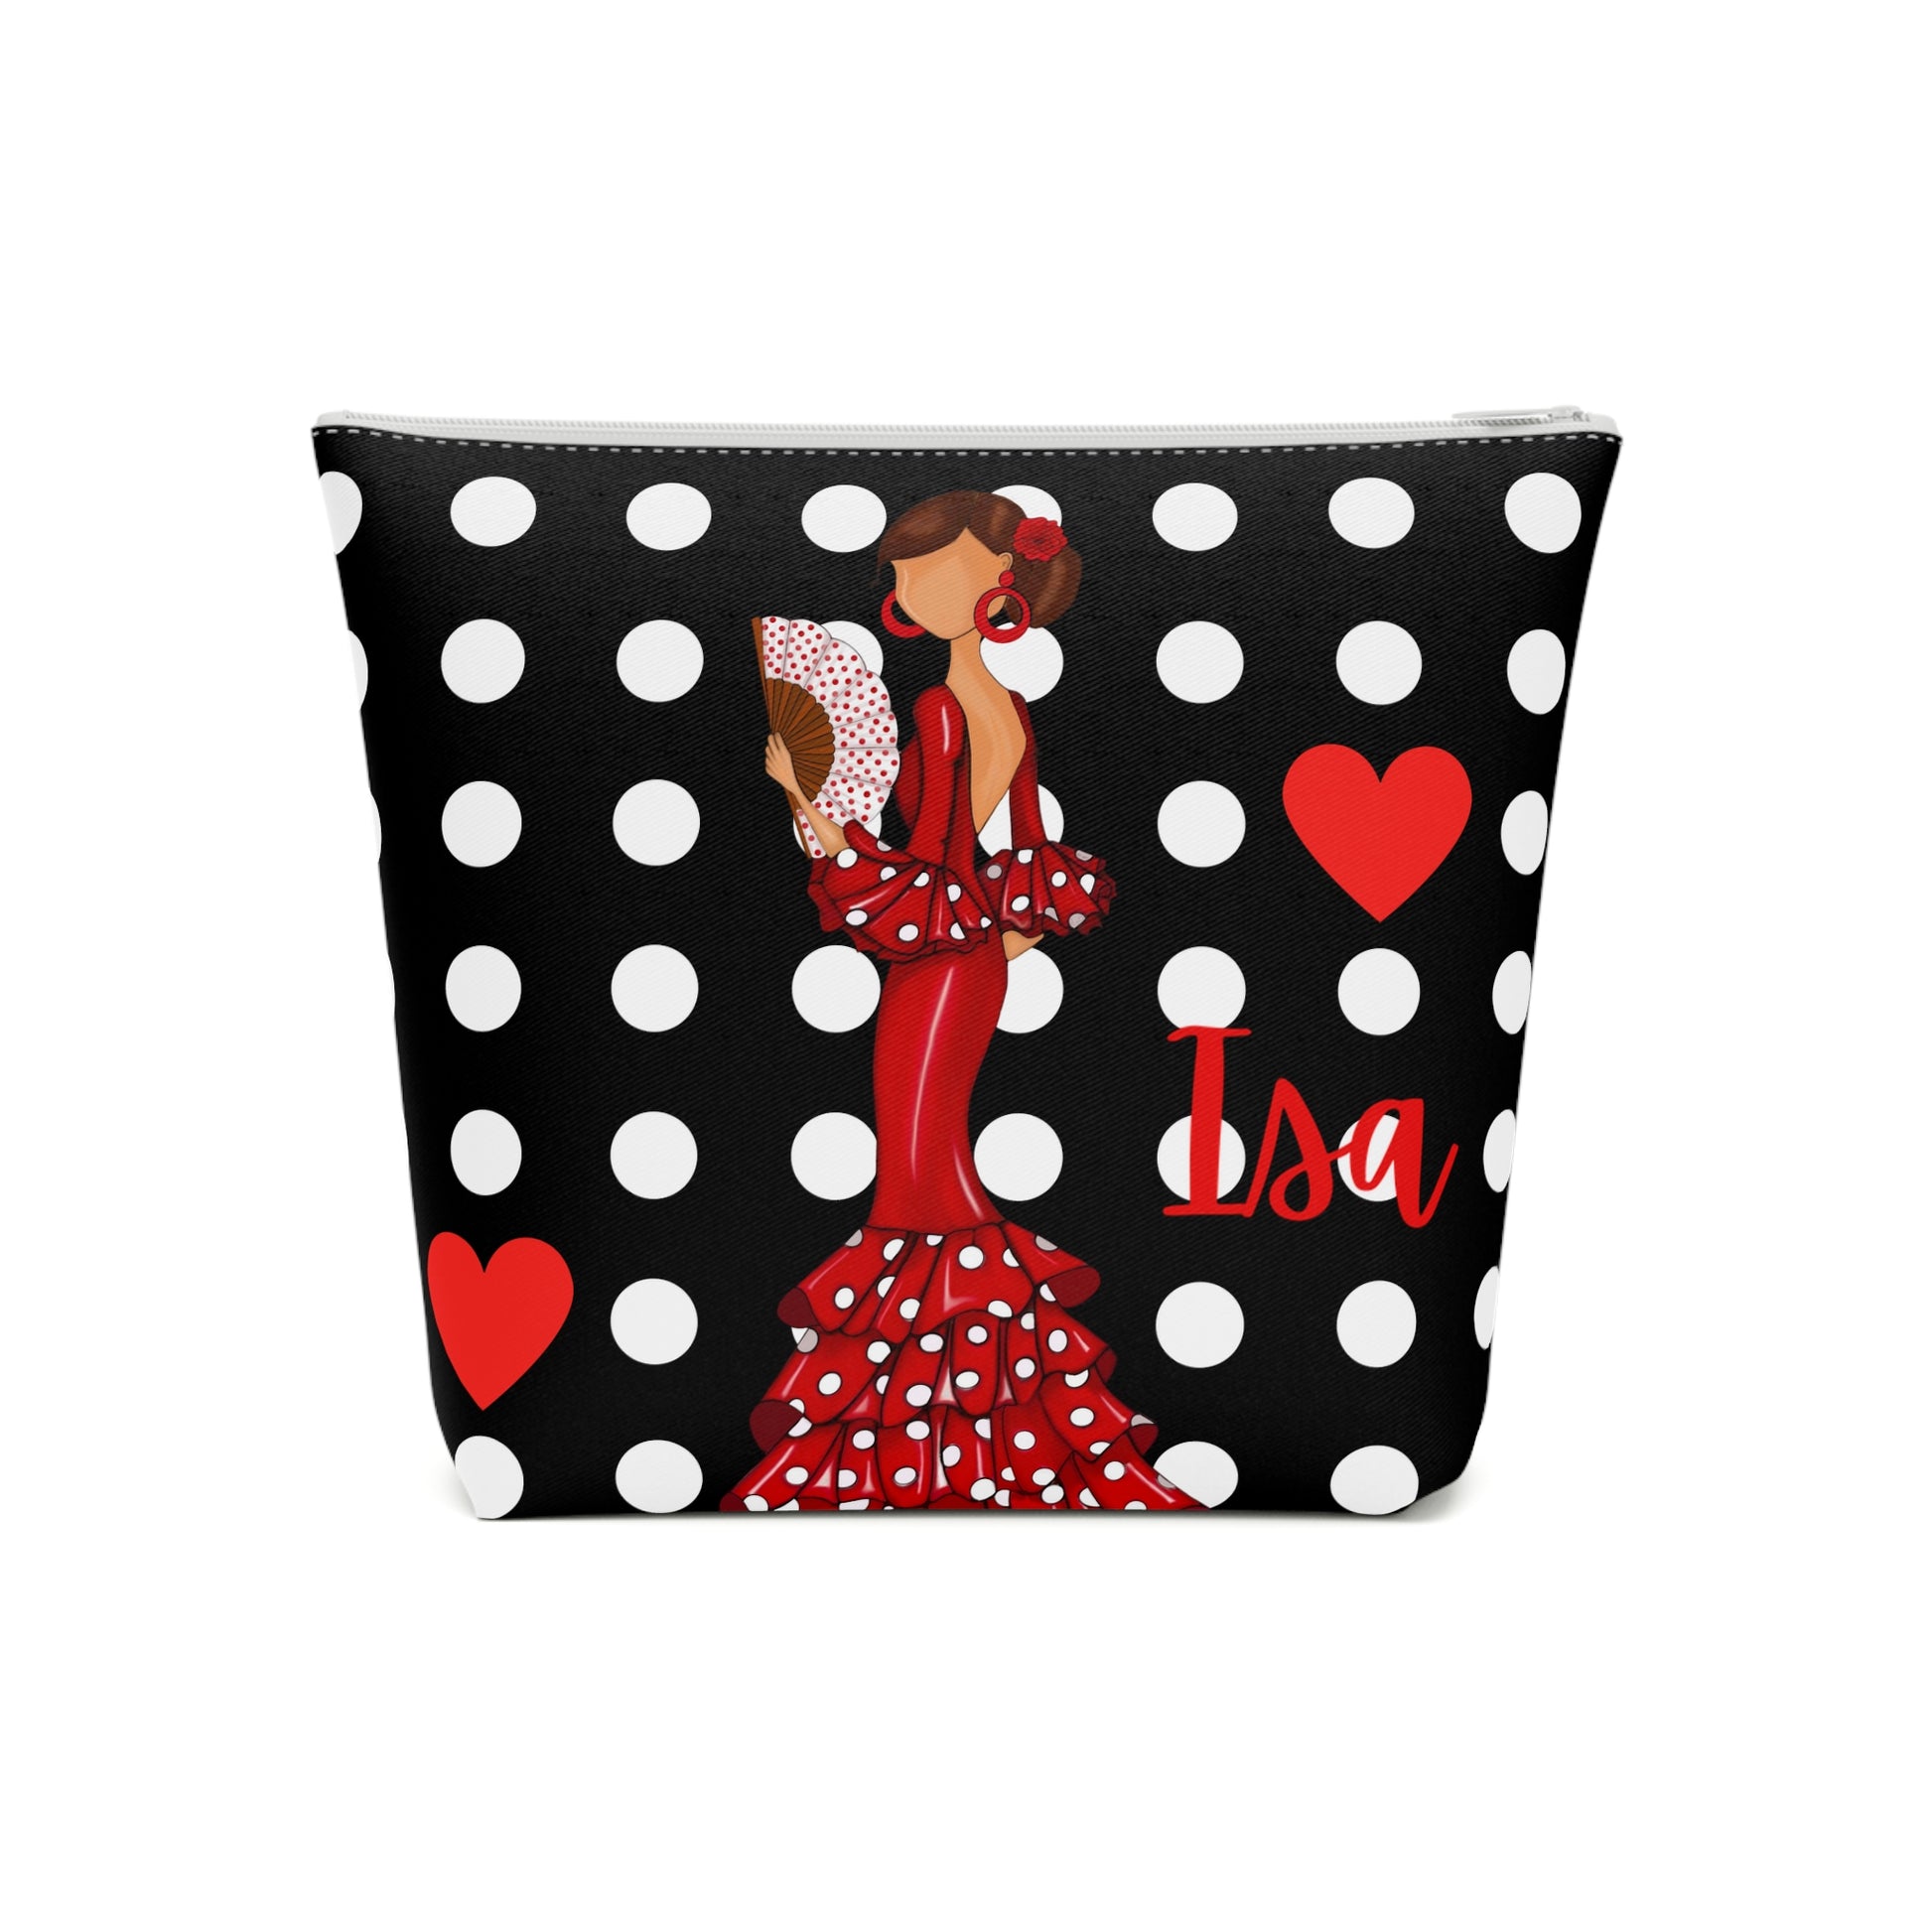 a black and white polka dot bag with a woman in a red dress holding a